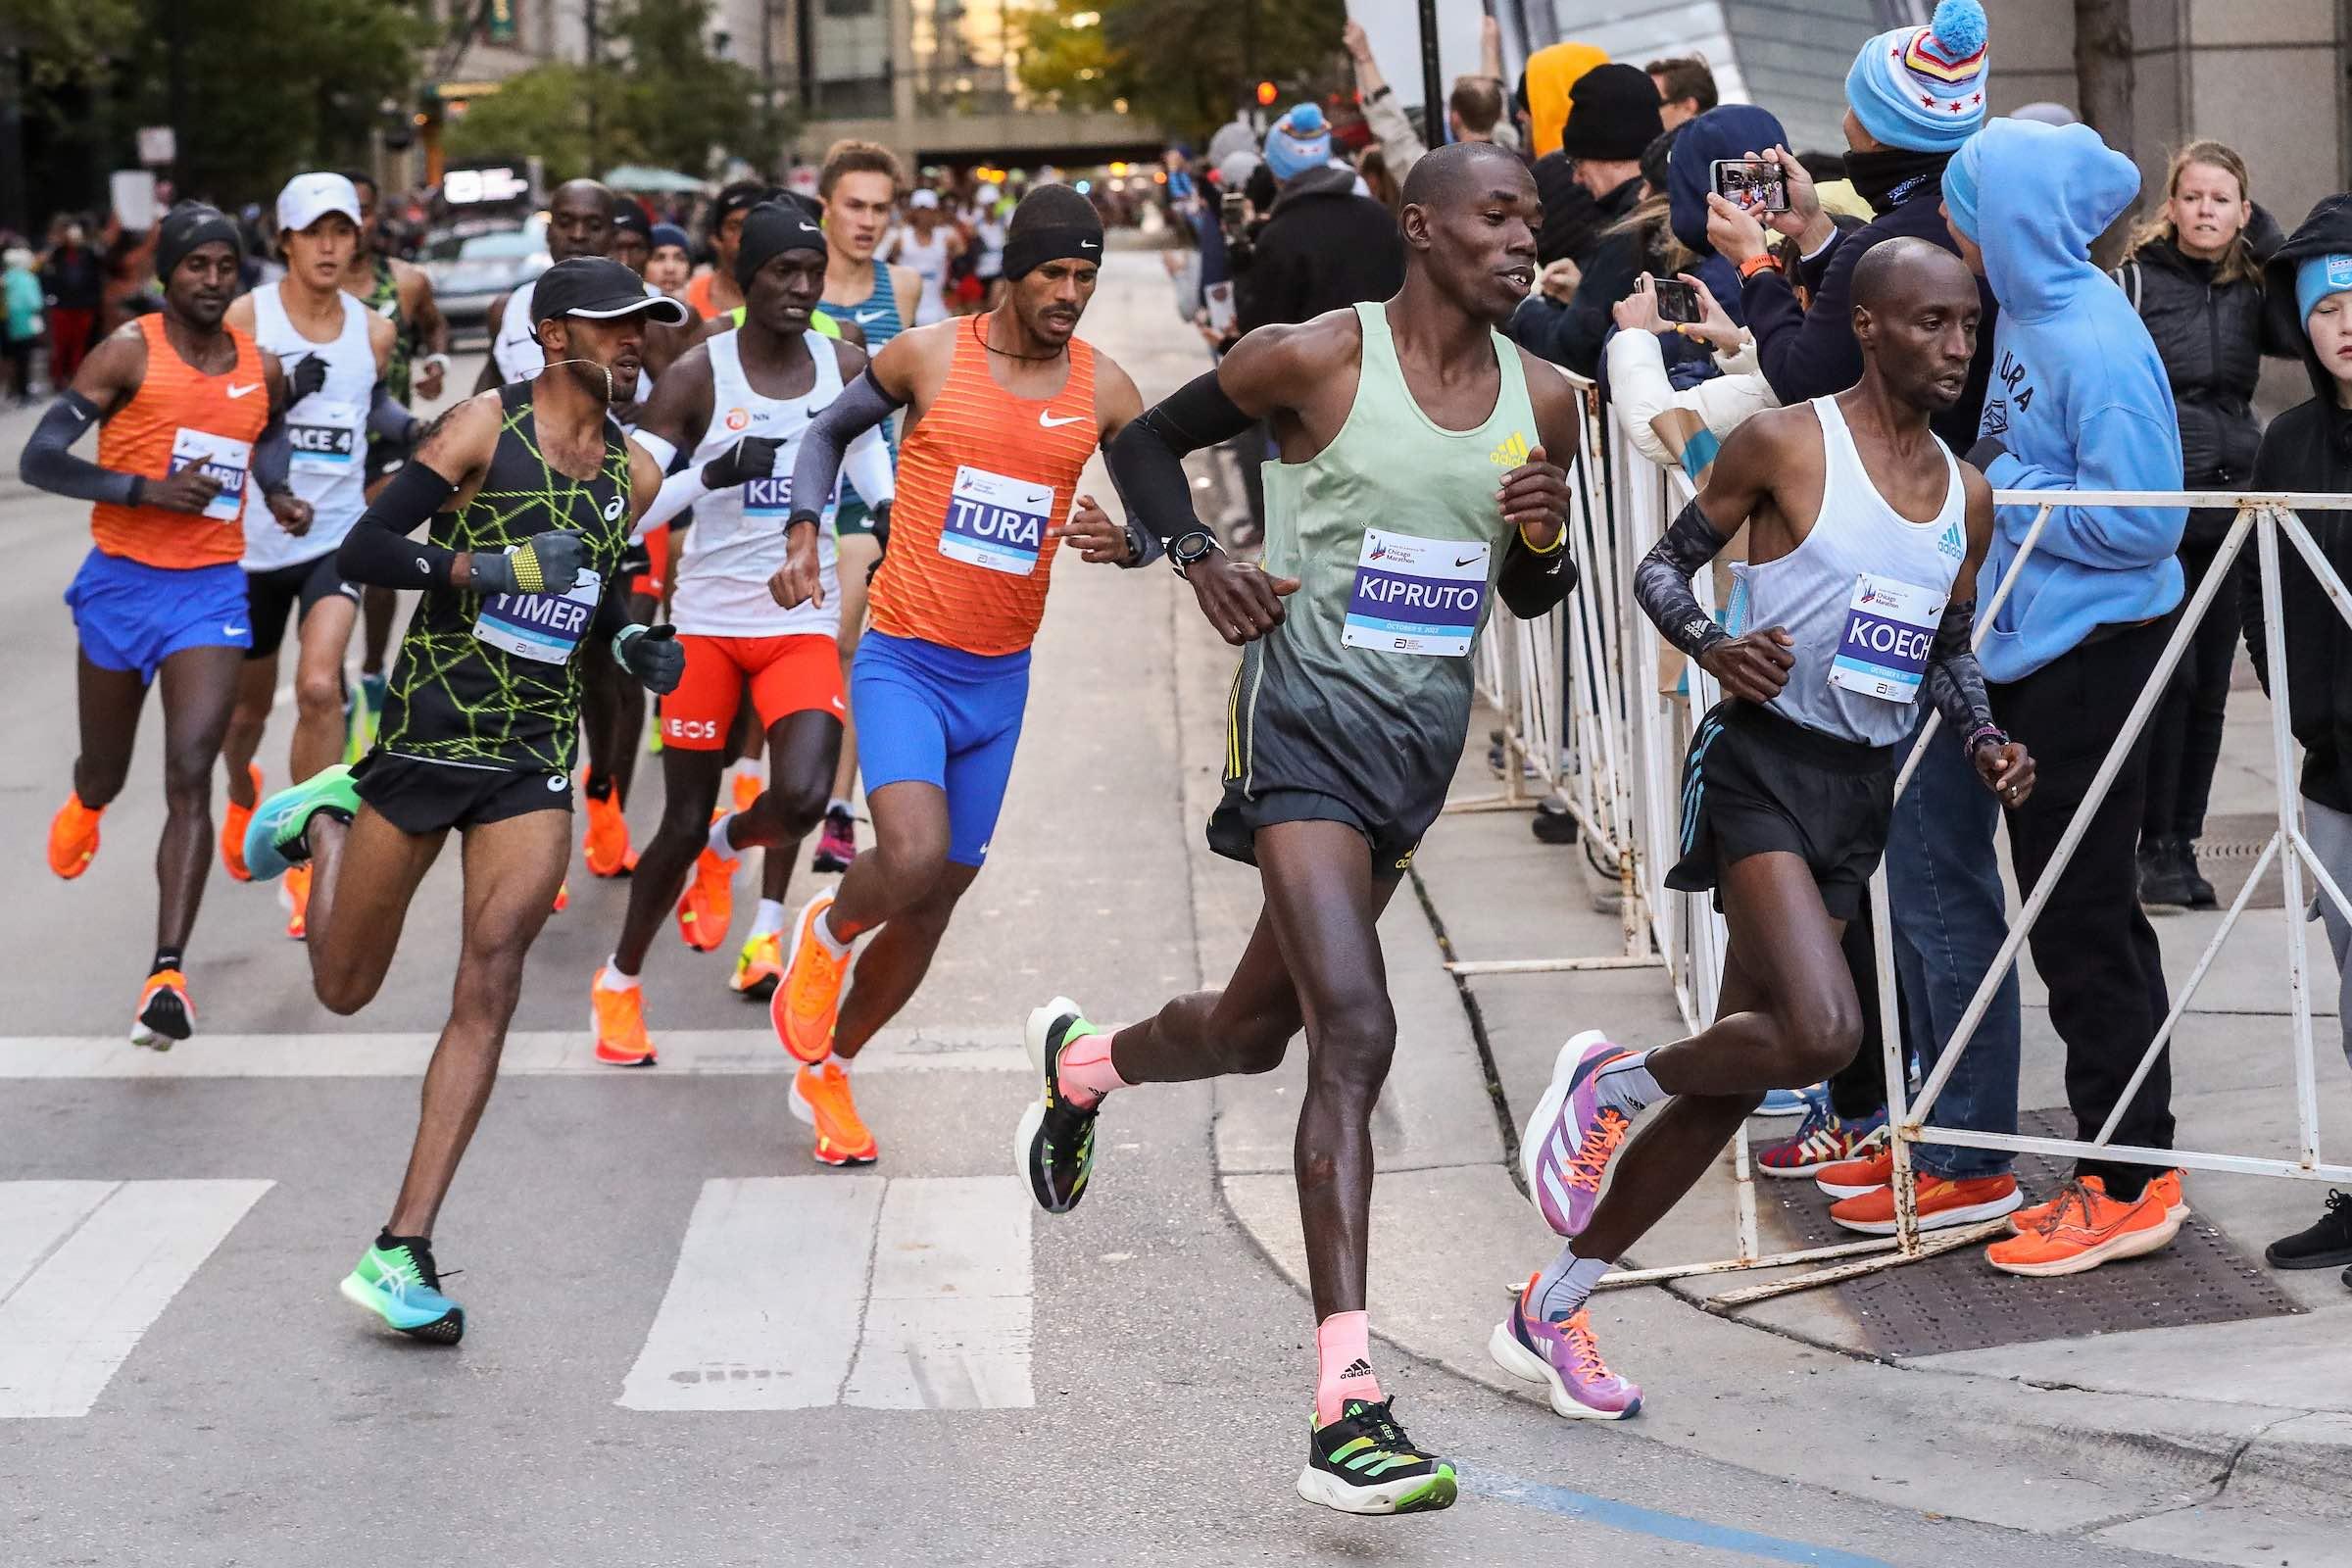 Benson Kipruto topped the men's division in 2022 and is hoping to repeat in 2023. (Kevin Morris / 2022 Bank of America Chicago Marathon)